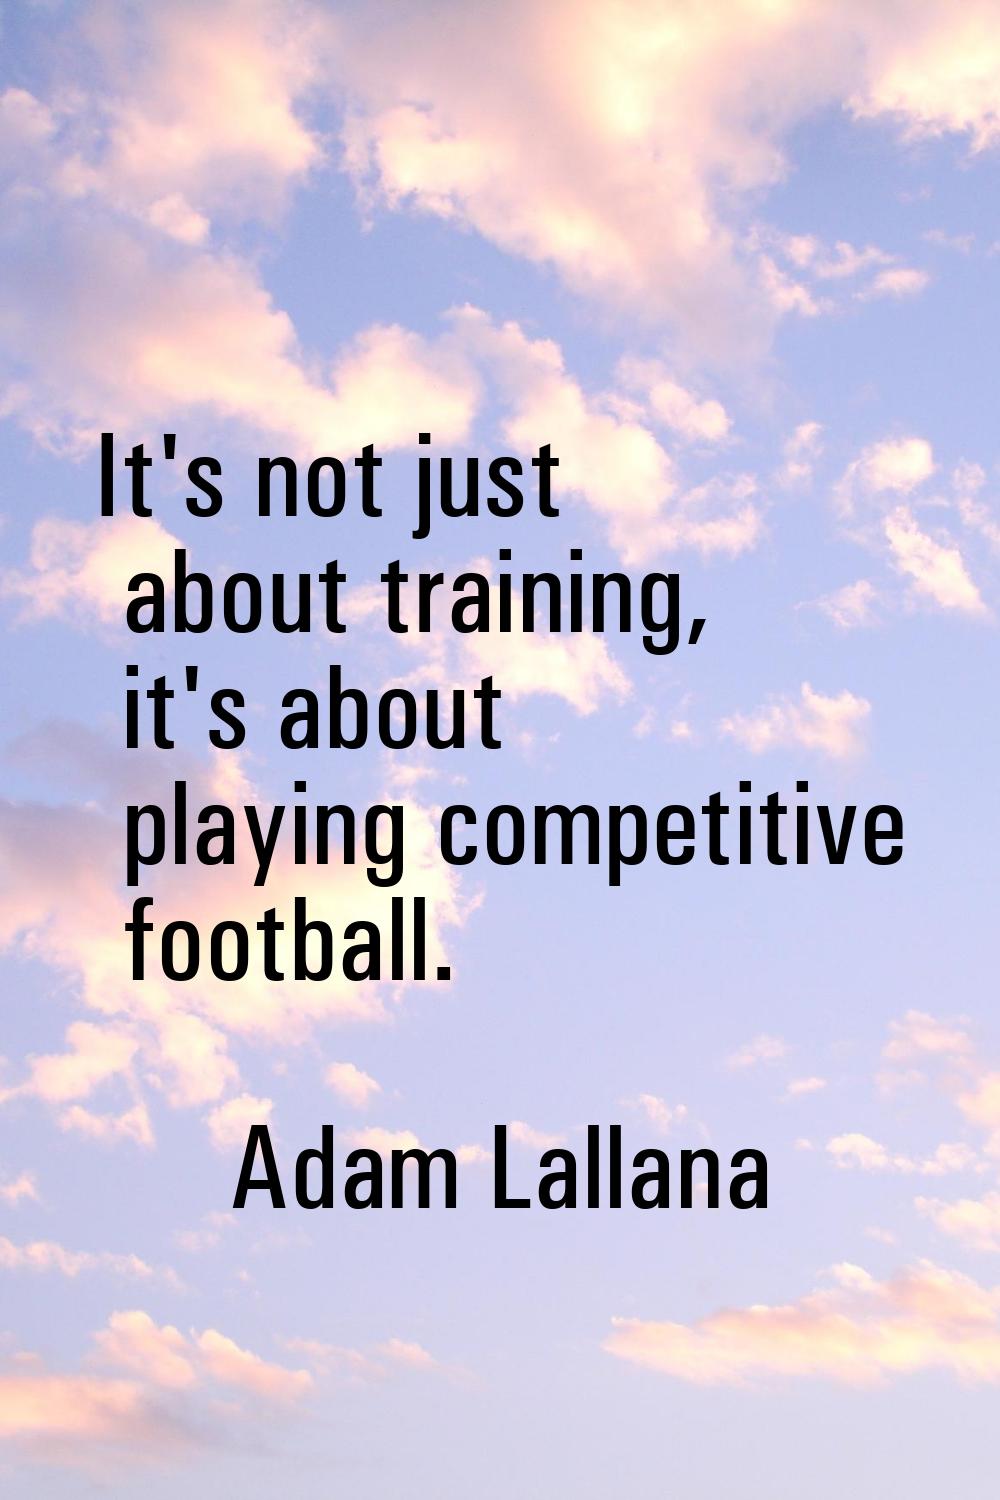 It's not just about training, it's about playing competitive football.